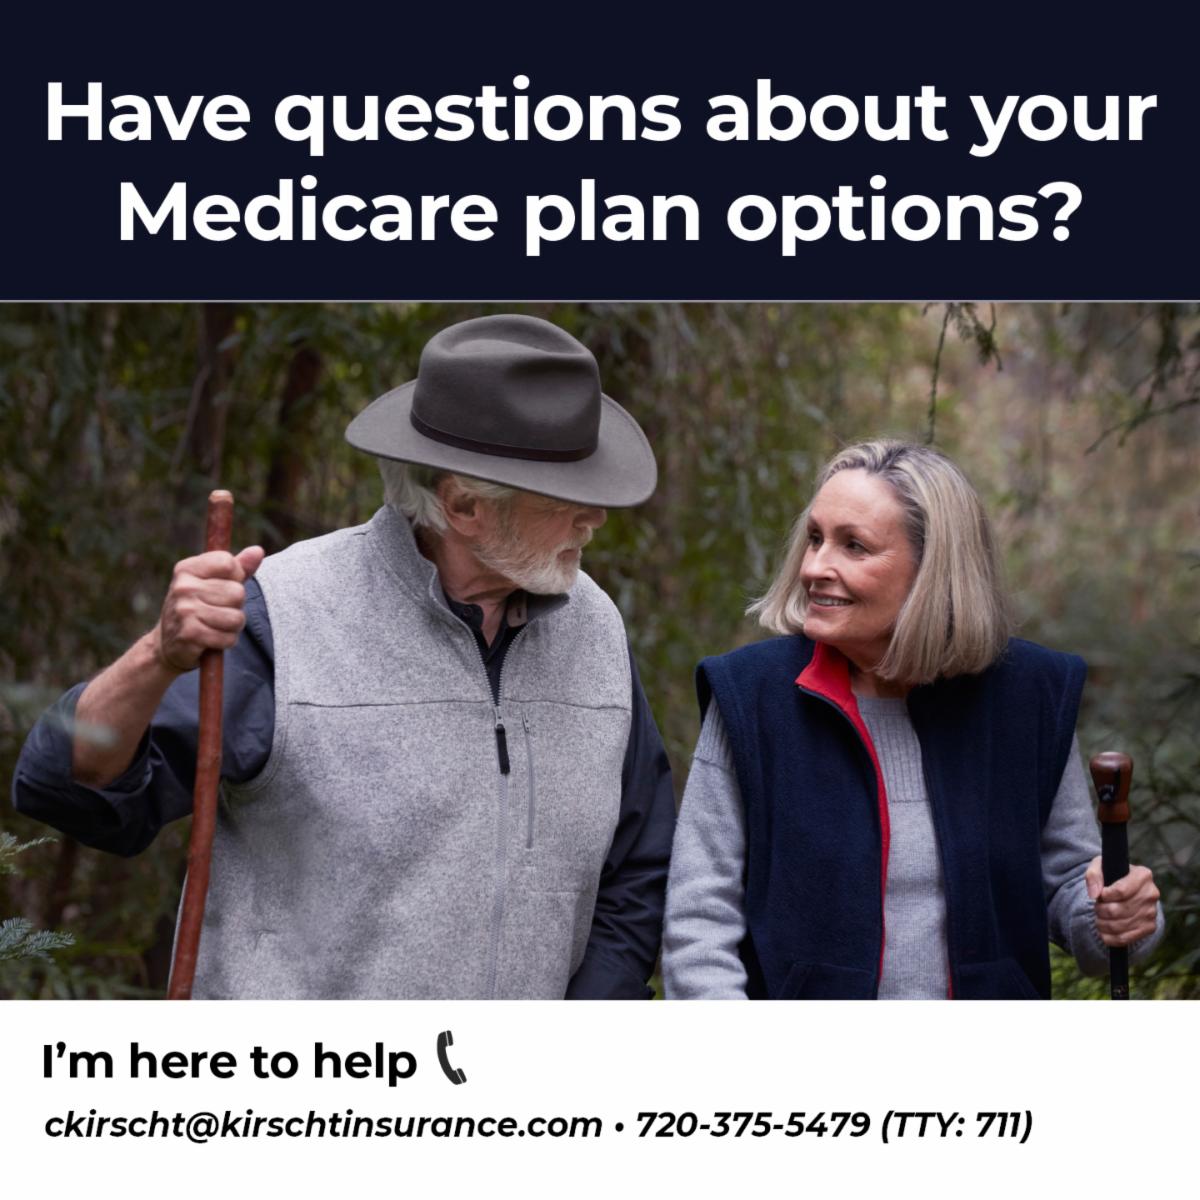 #Medicare #medicarecolorado #bridlewoodinsurance #kirschtinsurance #medicareadvantage #medicaredenver #turning65 #feelgoodaboutretirement #UnitedHealthCare #CignaMedicare #AetnaMedicare #AnthemMedicare #HumanaMedicare #KaiserMedicare #WellCare #PhysiciansMutual #ClearSpring